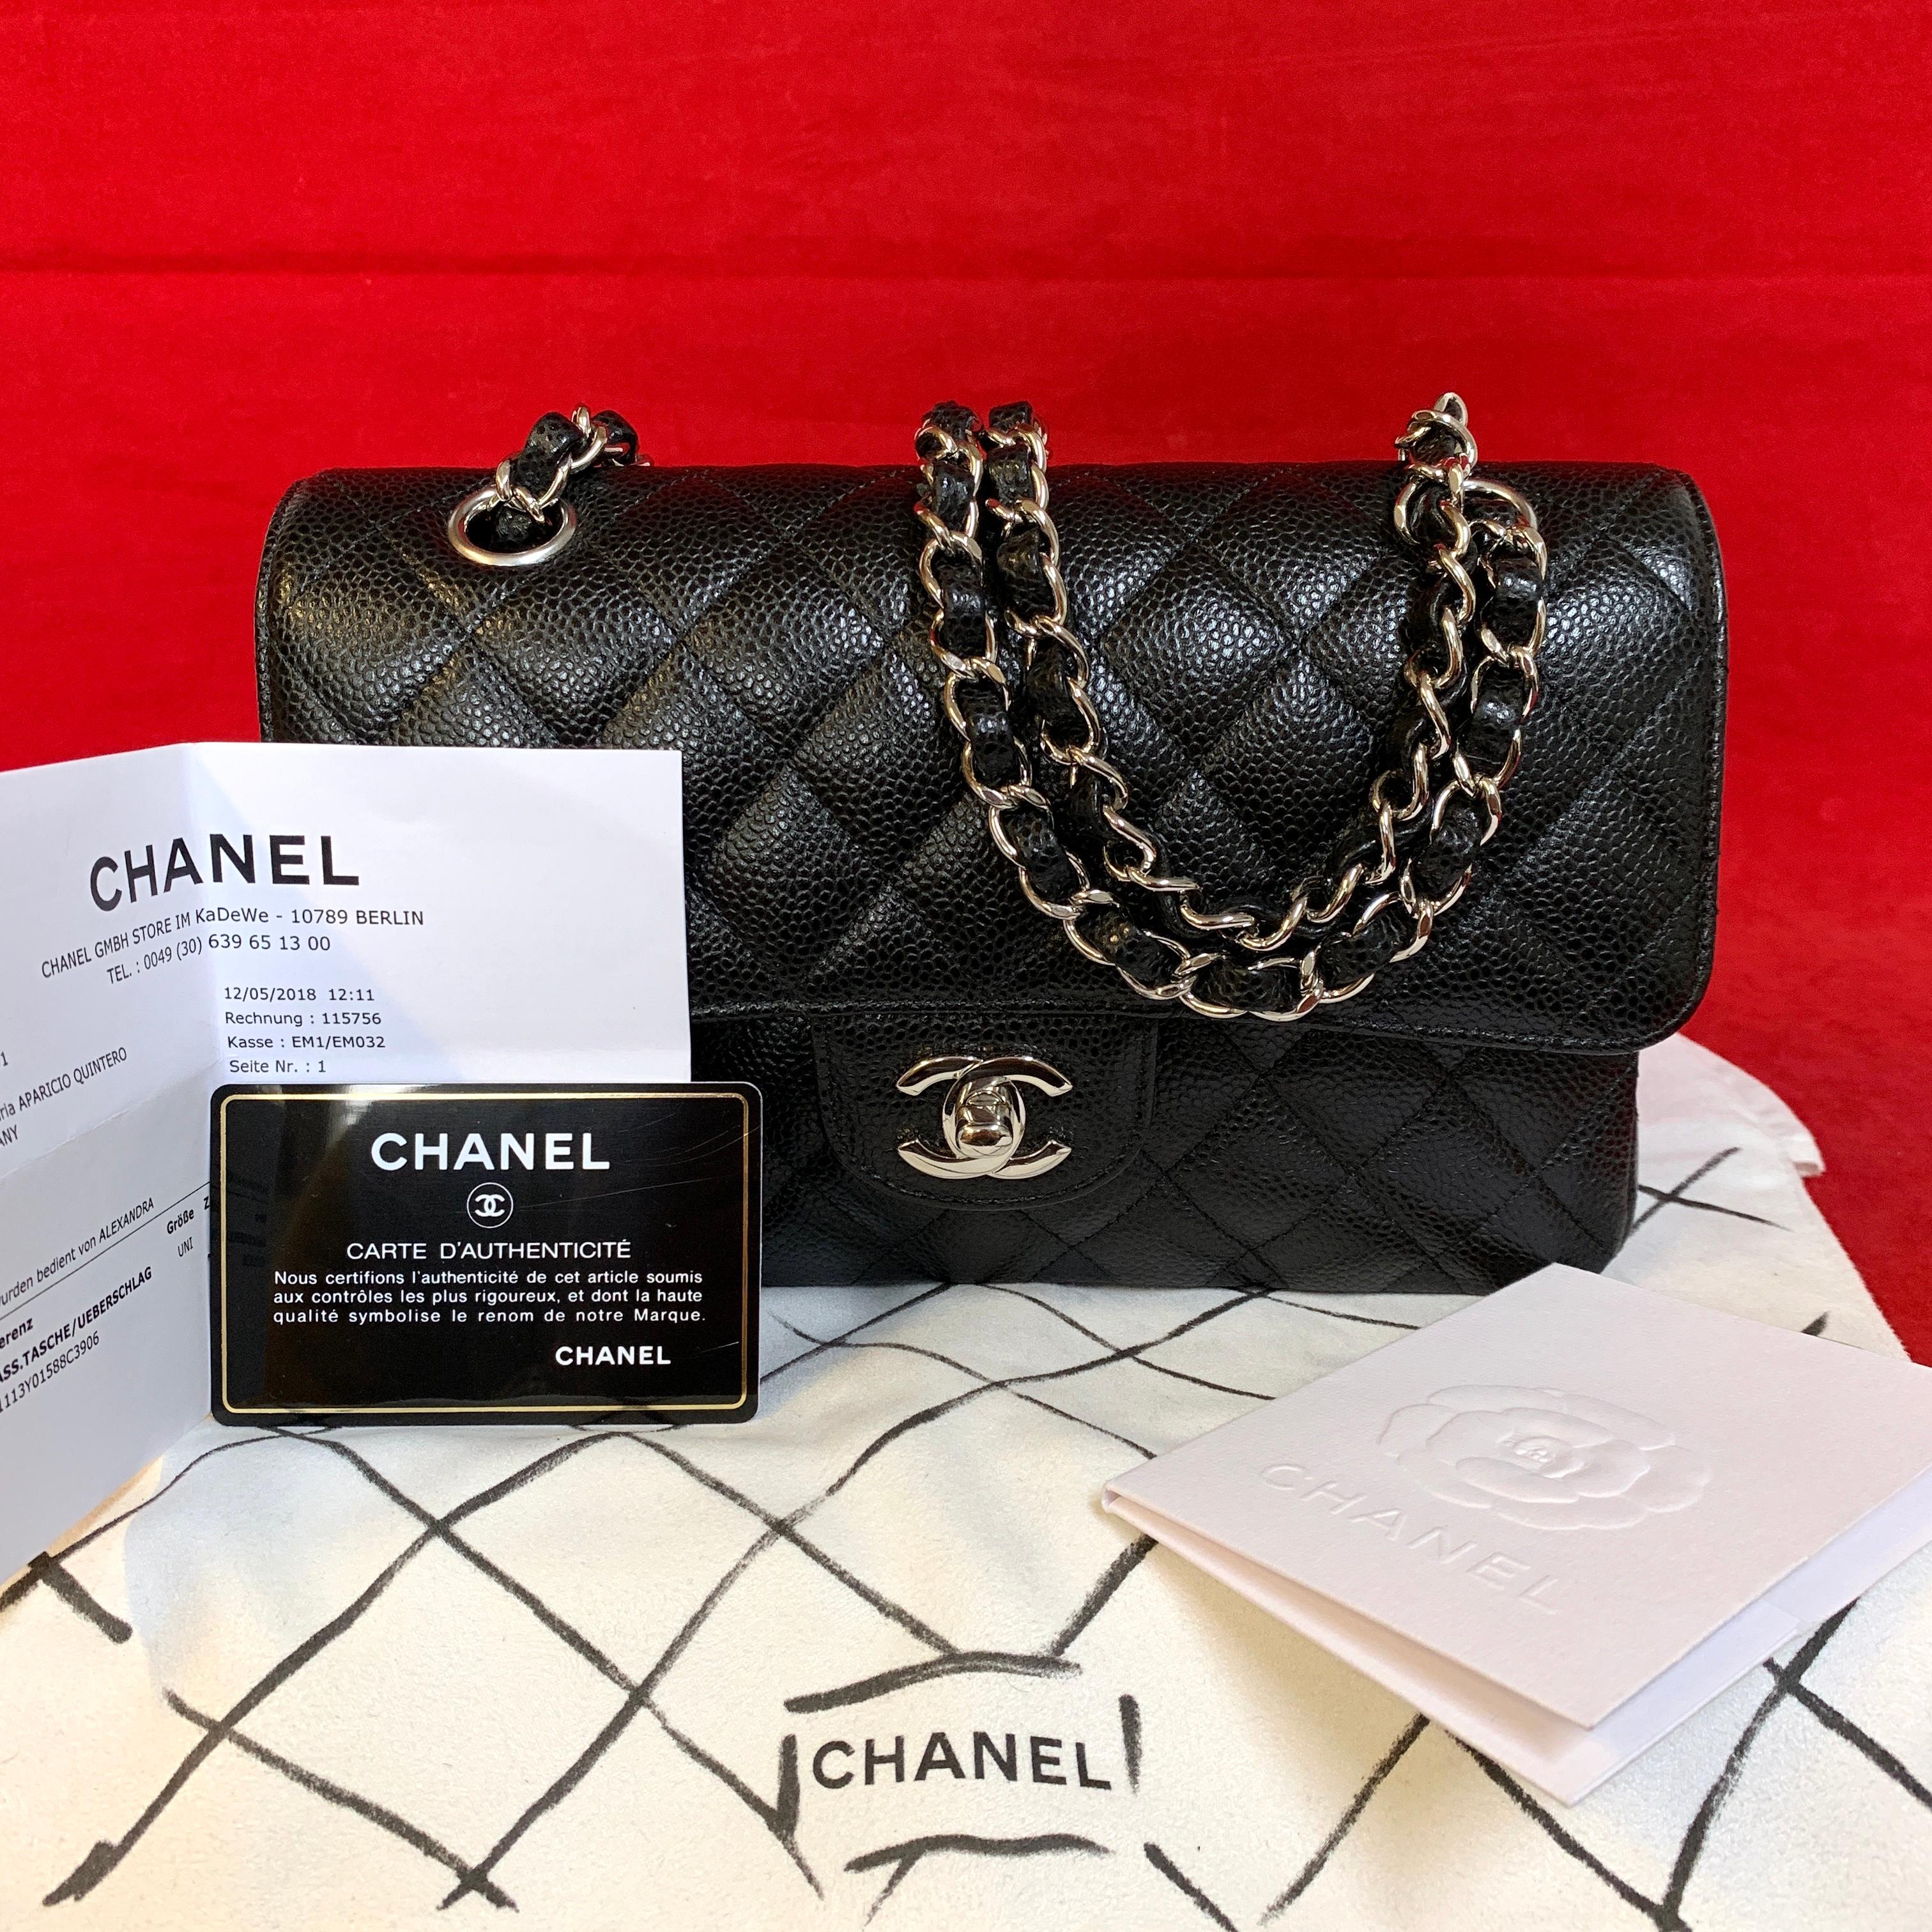 CHANEL classic double flap Bag small made of black quilted caviar with silver hardware.
Model number: A01113

The bag is in a very good condition and has no signs of use.

The delivery includes:
- Chanel small double flap bag
- Dustbag
- Original